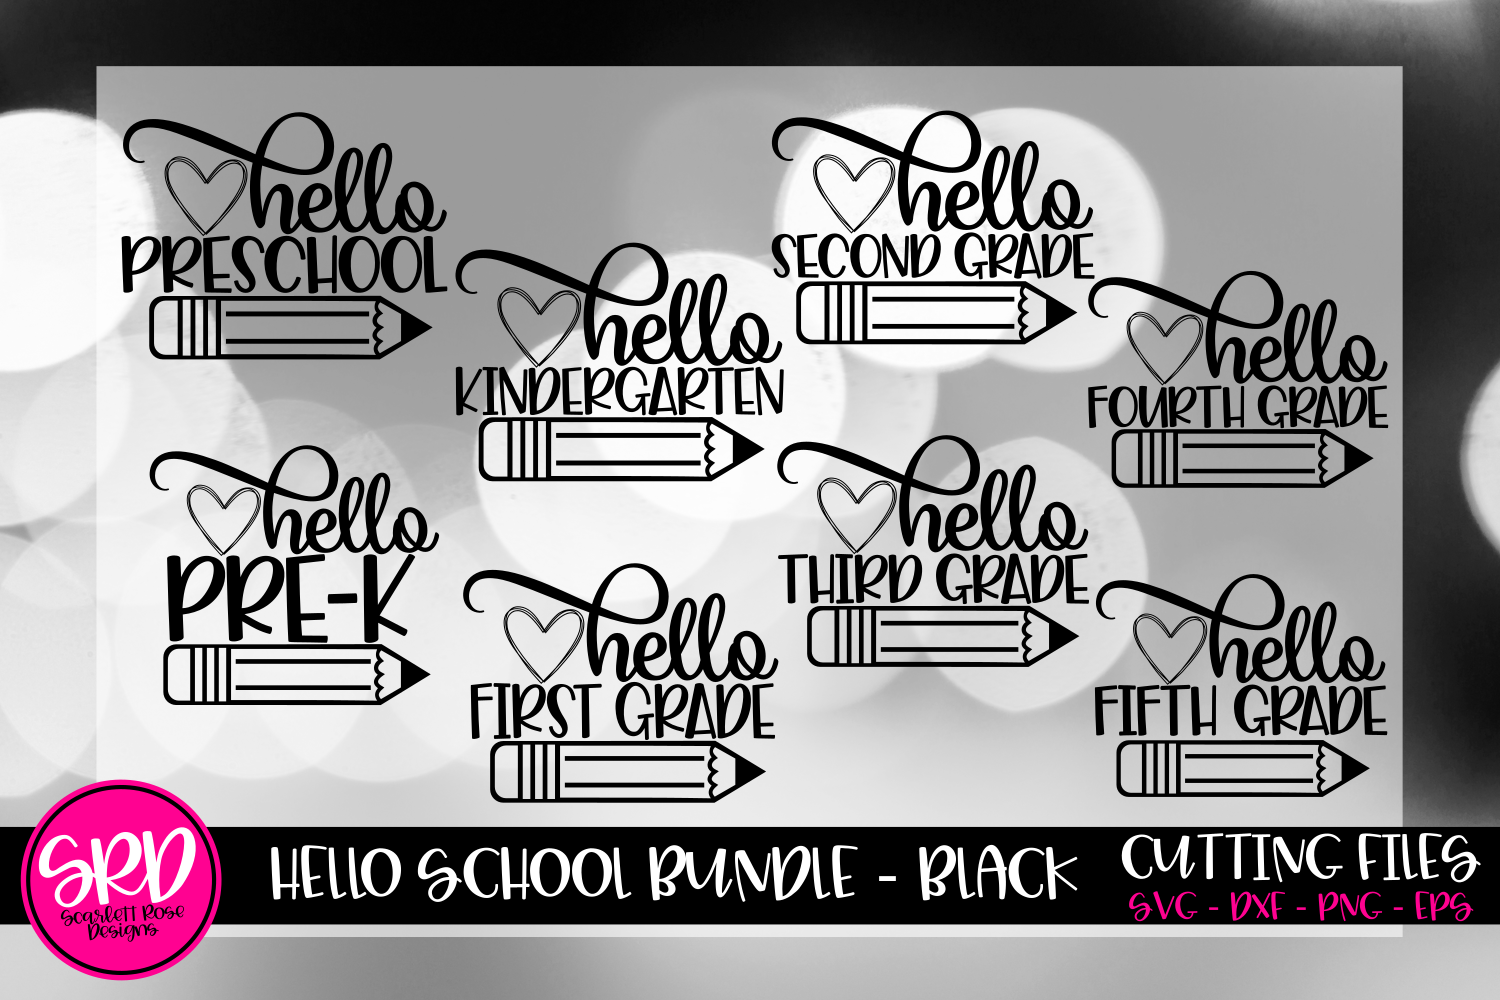 Download Back To School Bundle Svg Preschool To 5th Grade Bundle Kindergarten Svg 1st Grade Svg 2nd Grade Svg School Svg Designs School Cut Files Craft Supplies Tools Image Transfers Tomtherapy Co Il